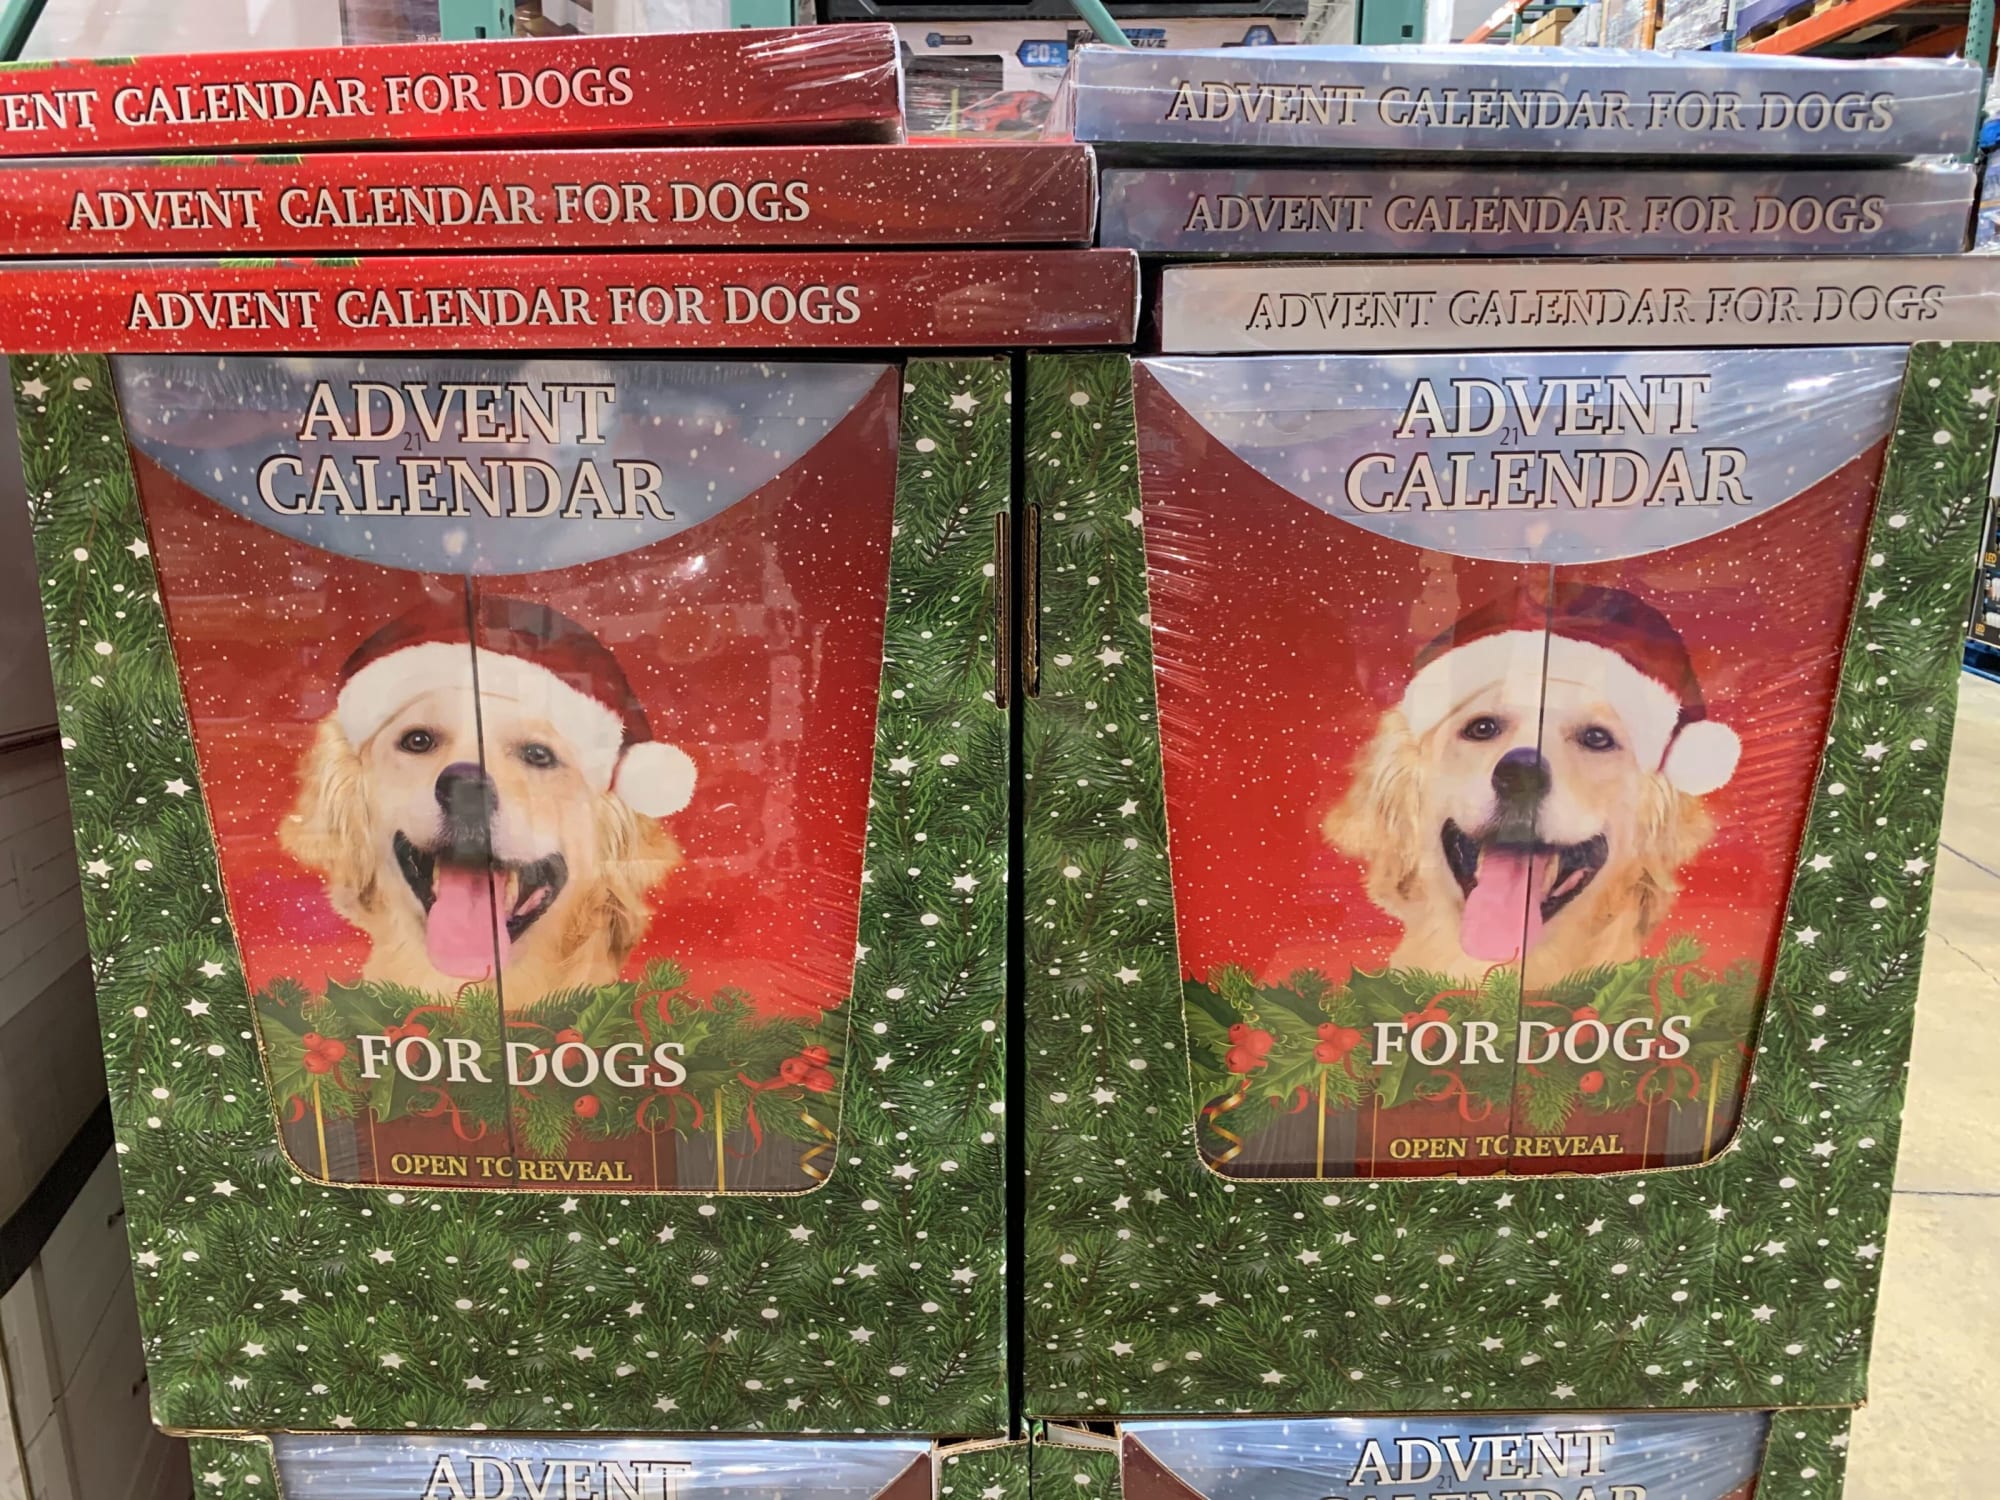 Costco selling an Advent Calendar for Dogs that will make humans jealous